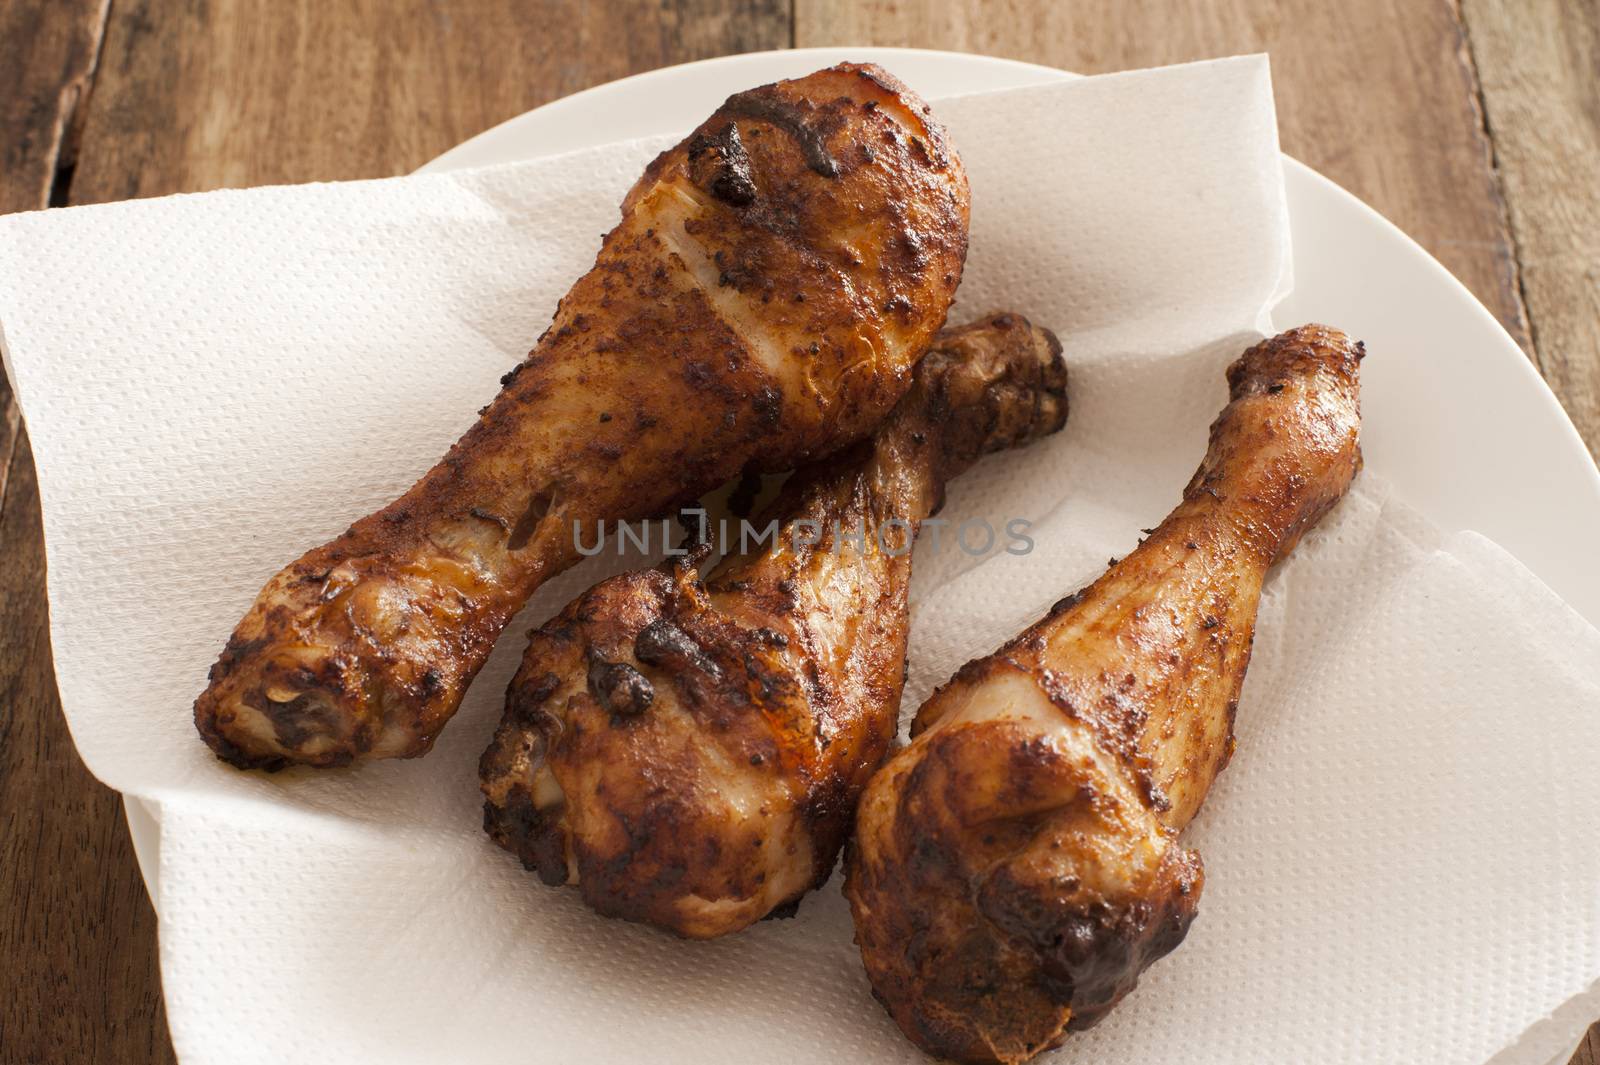 Three marinated spicy chicken drum sticks served on white paper on a plate for a delicious finger snack